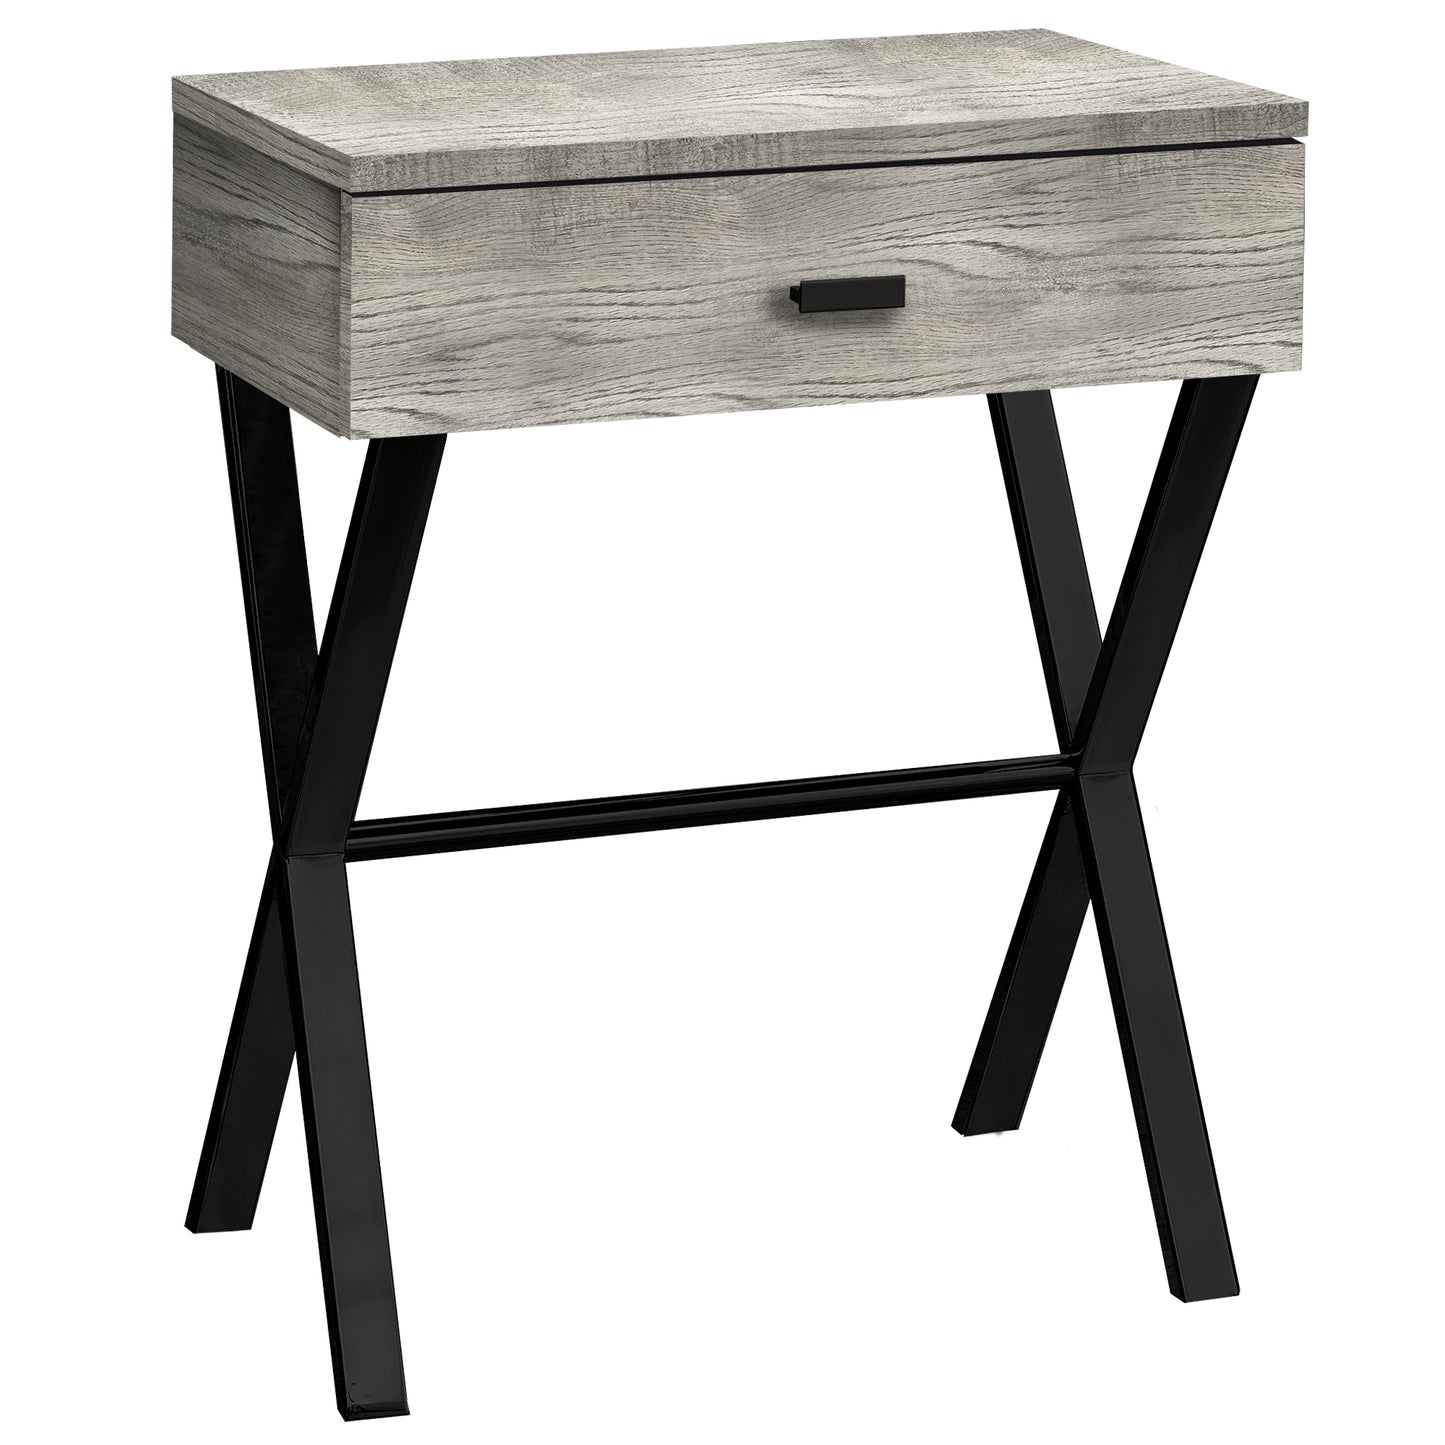 12" x 18.25" x 22.25" Grey Finish and Black Metal Accent Table